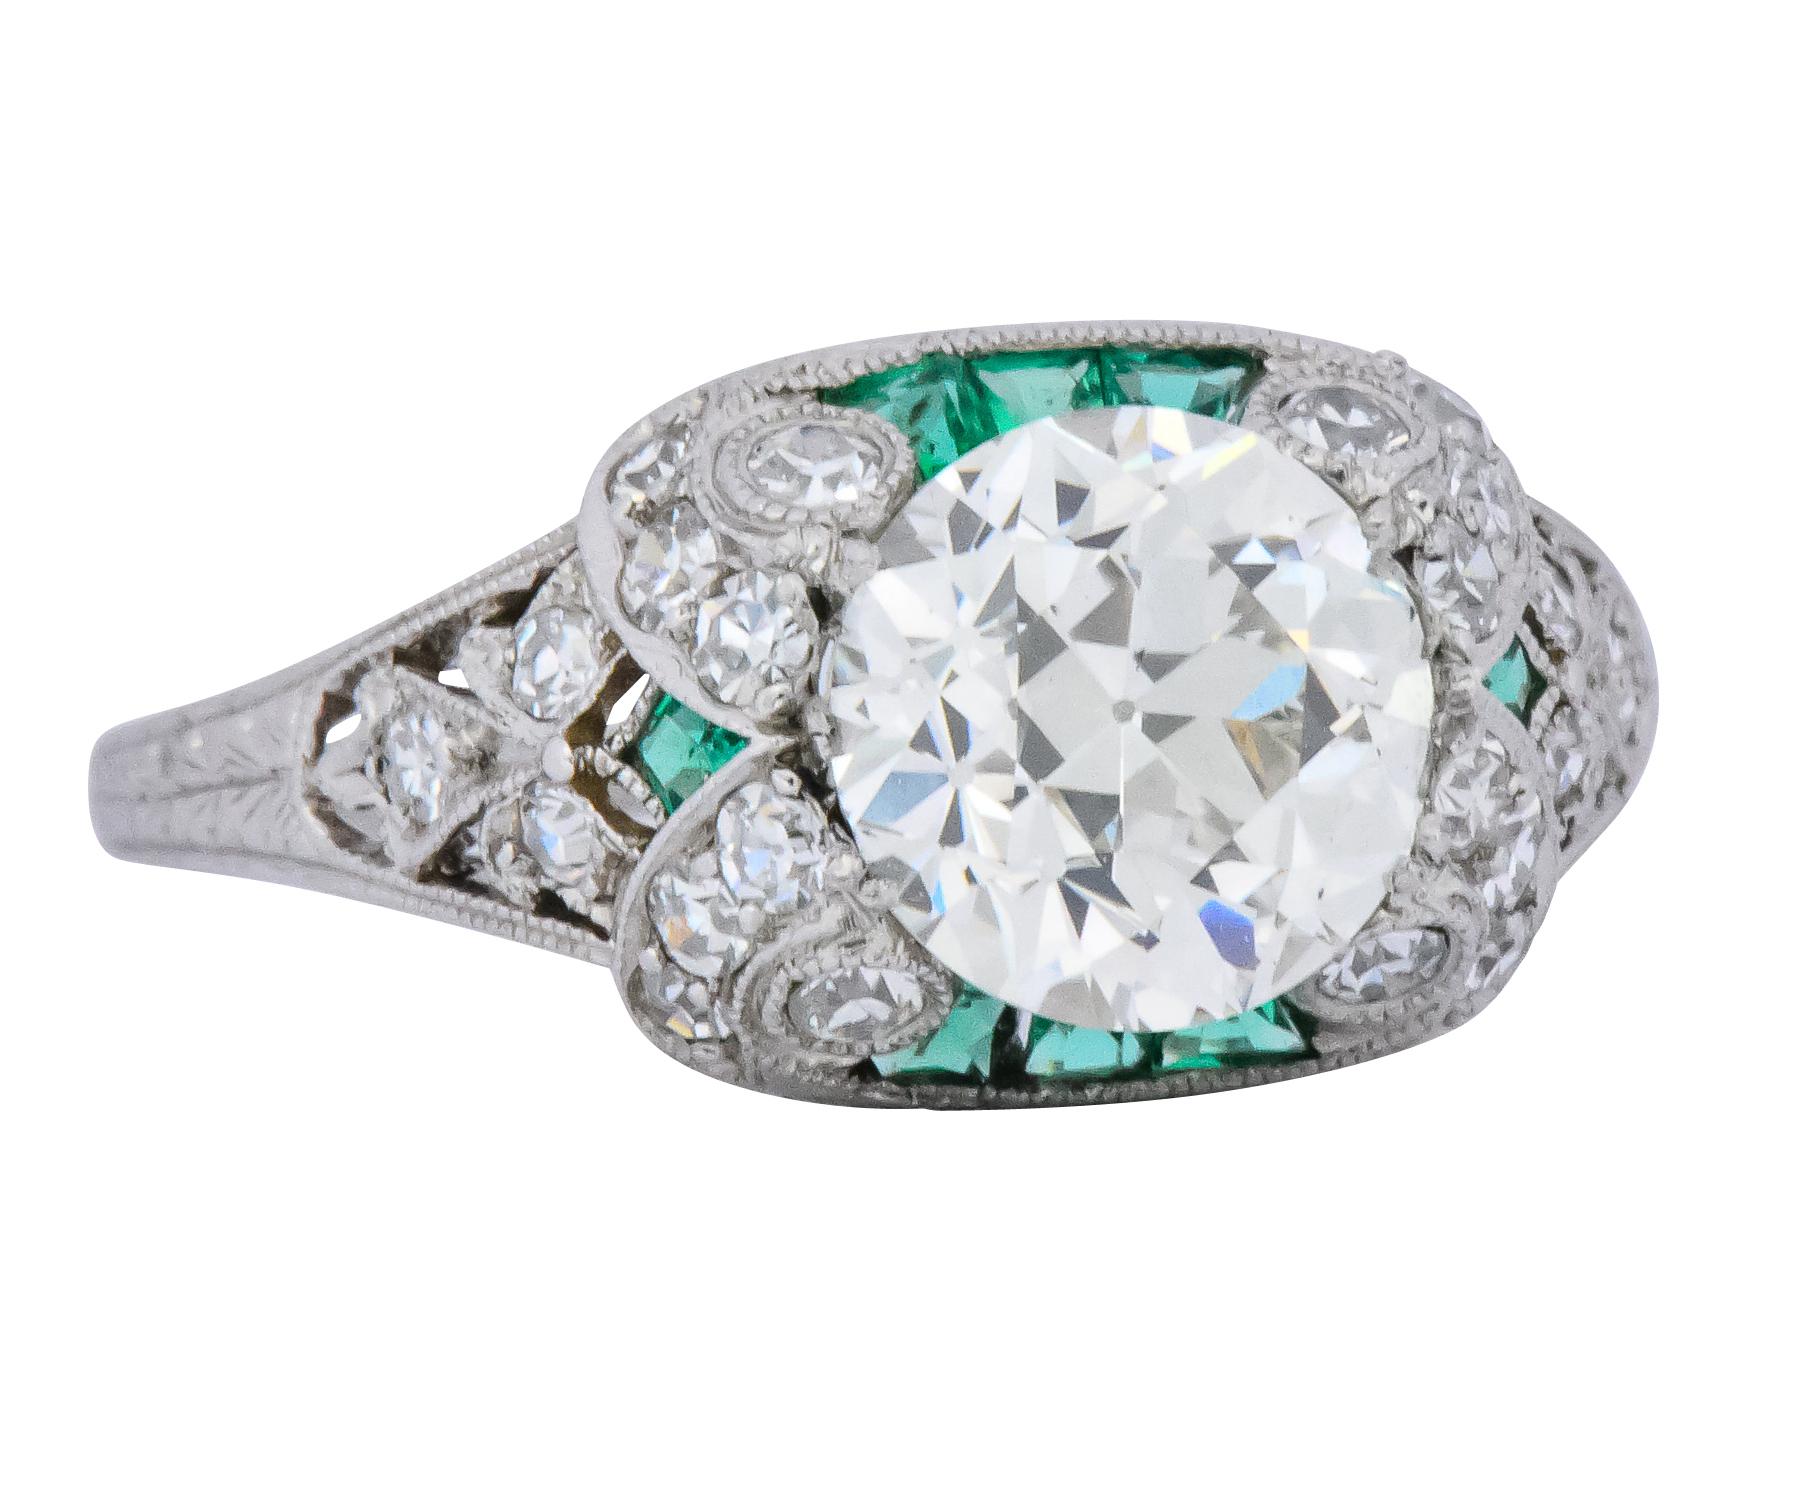 Centering an old European cut diamond weighing 1.59 carats, J color and SI1 clarity

With vibrant calibré french cut emeralds, channel set, tucked under the center

Accented by single cut diamonds weighing approximately 0.51 carats total, H color